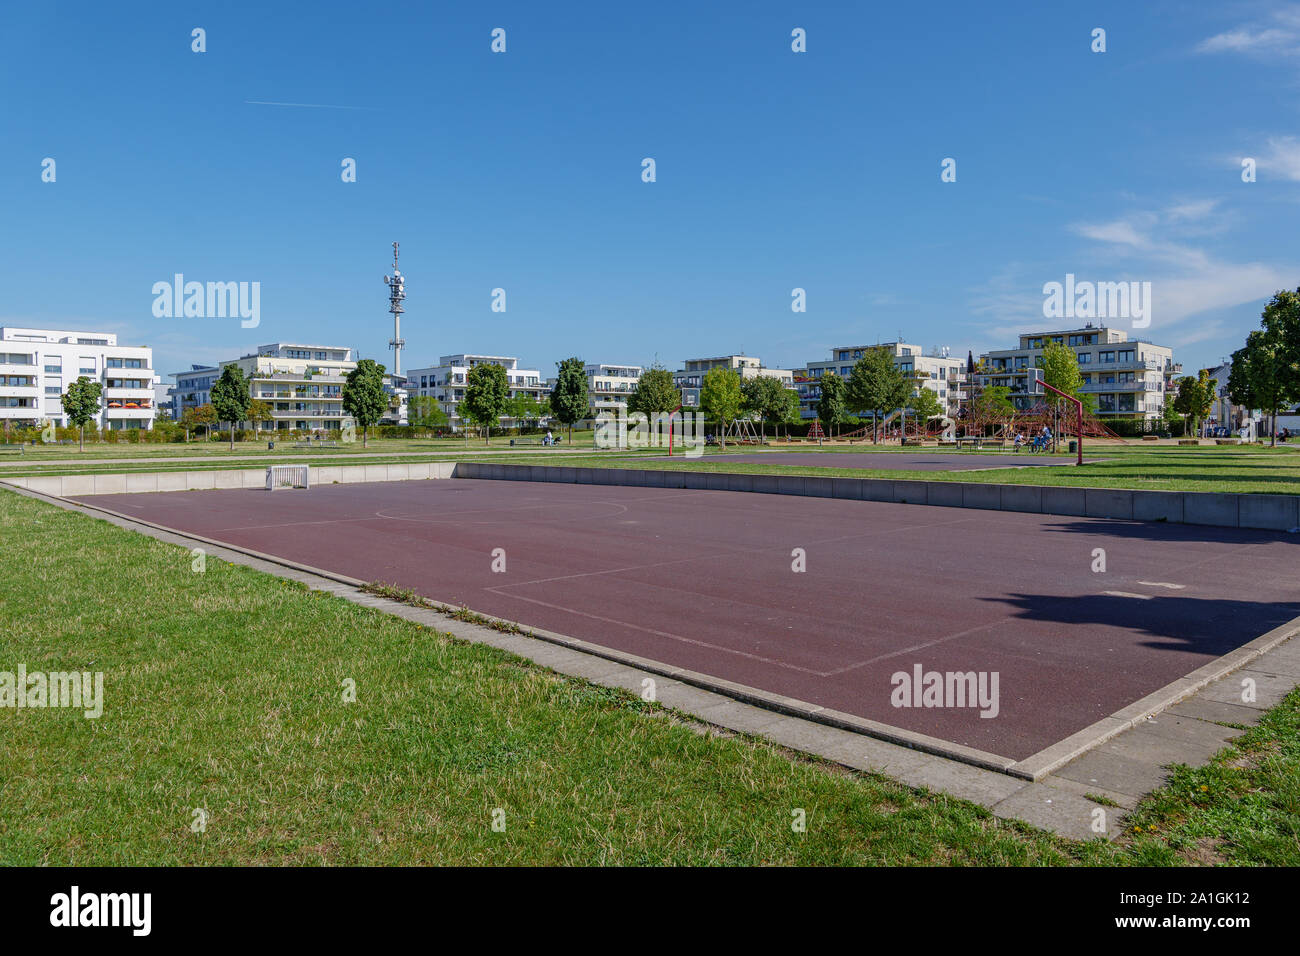 Football, soccer or futsal court field  at Bürgerpark Kalk, public park surrounded with housing and residence. Stock Photo